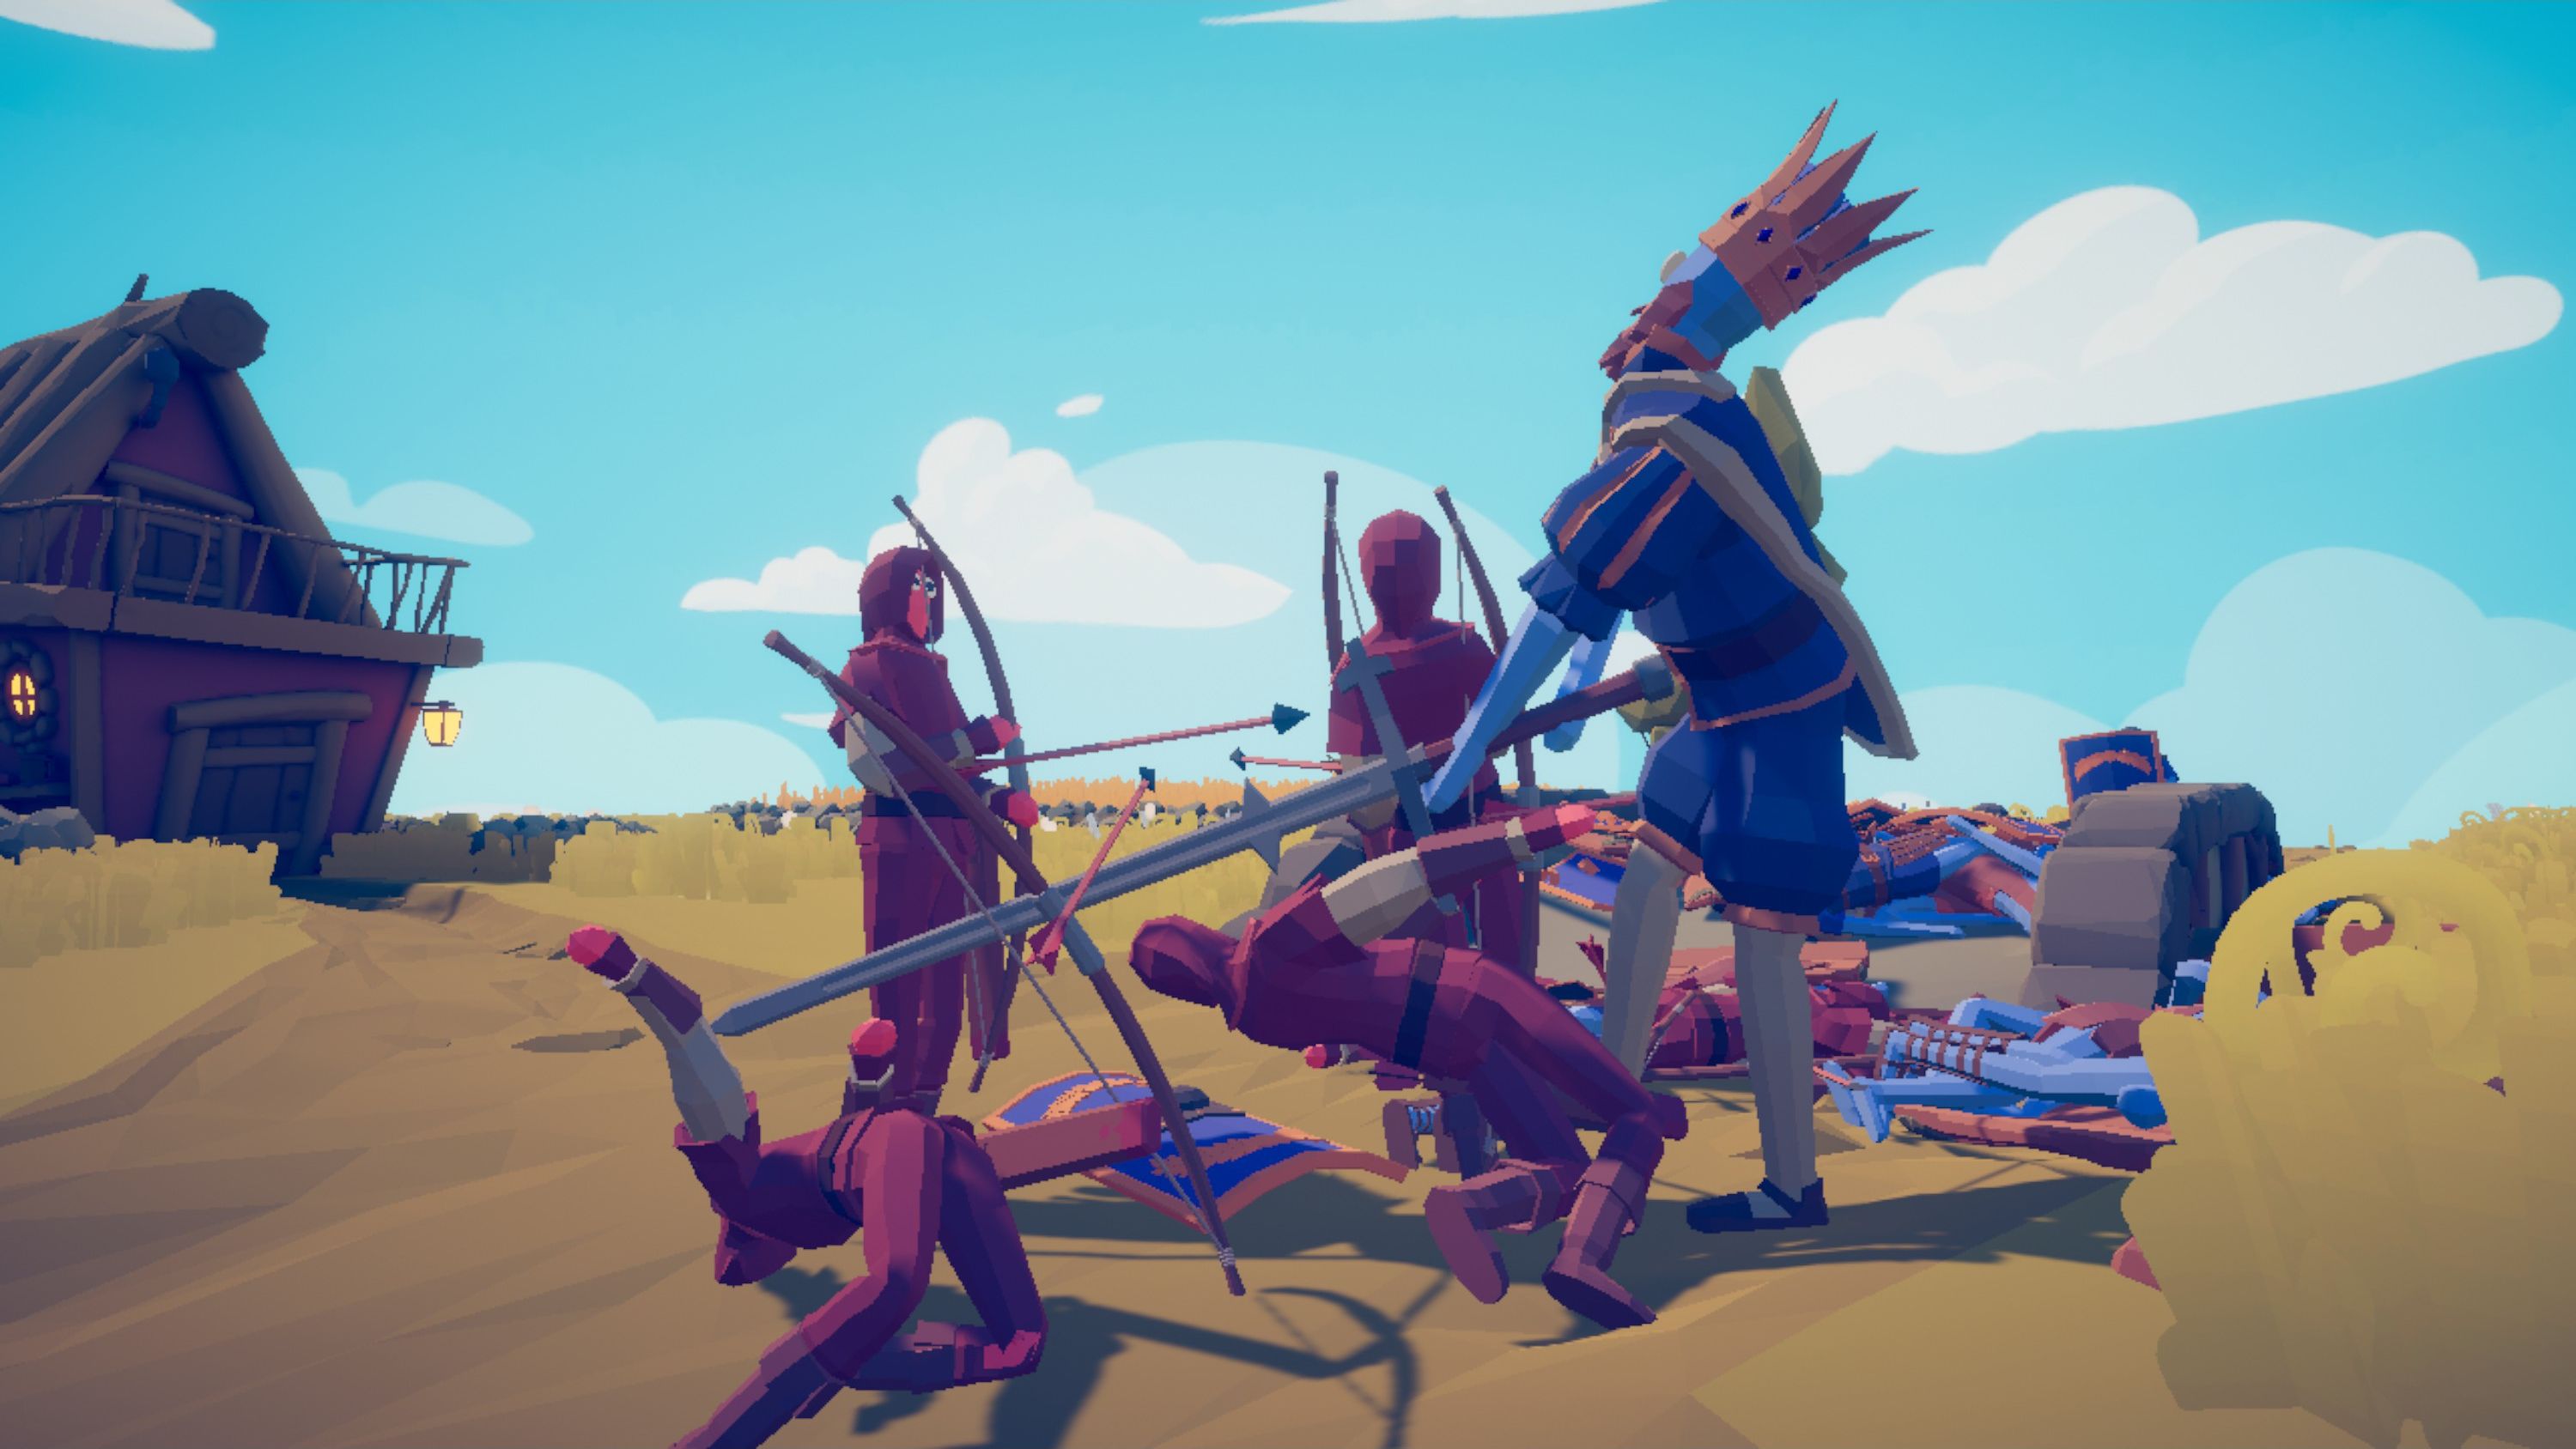 how to get the new totally accurate battle simulator update